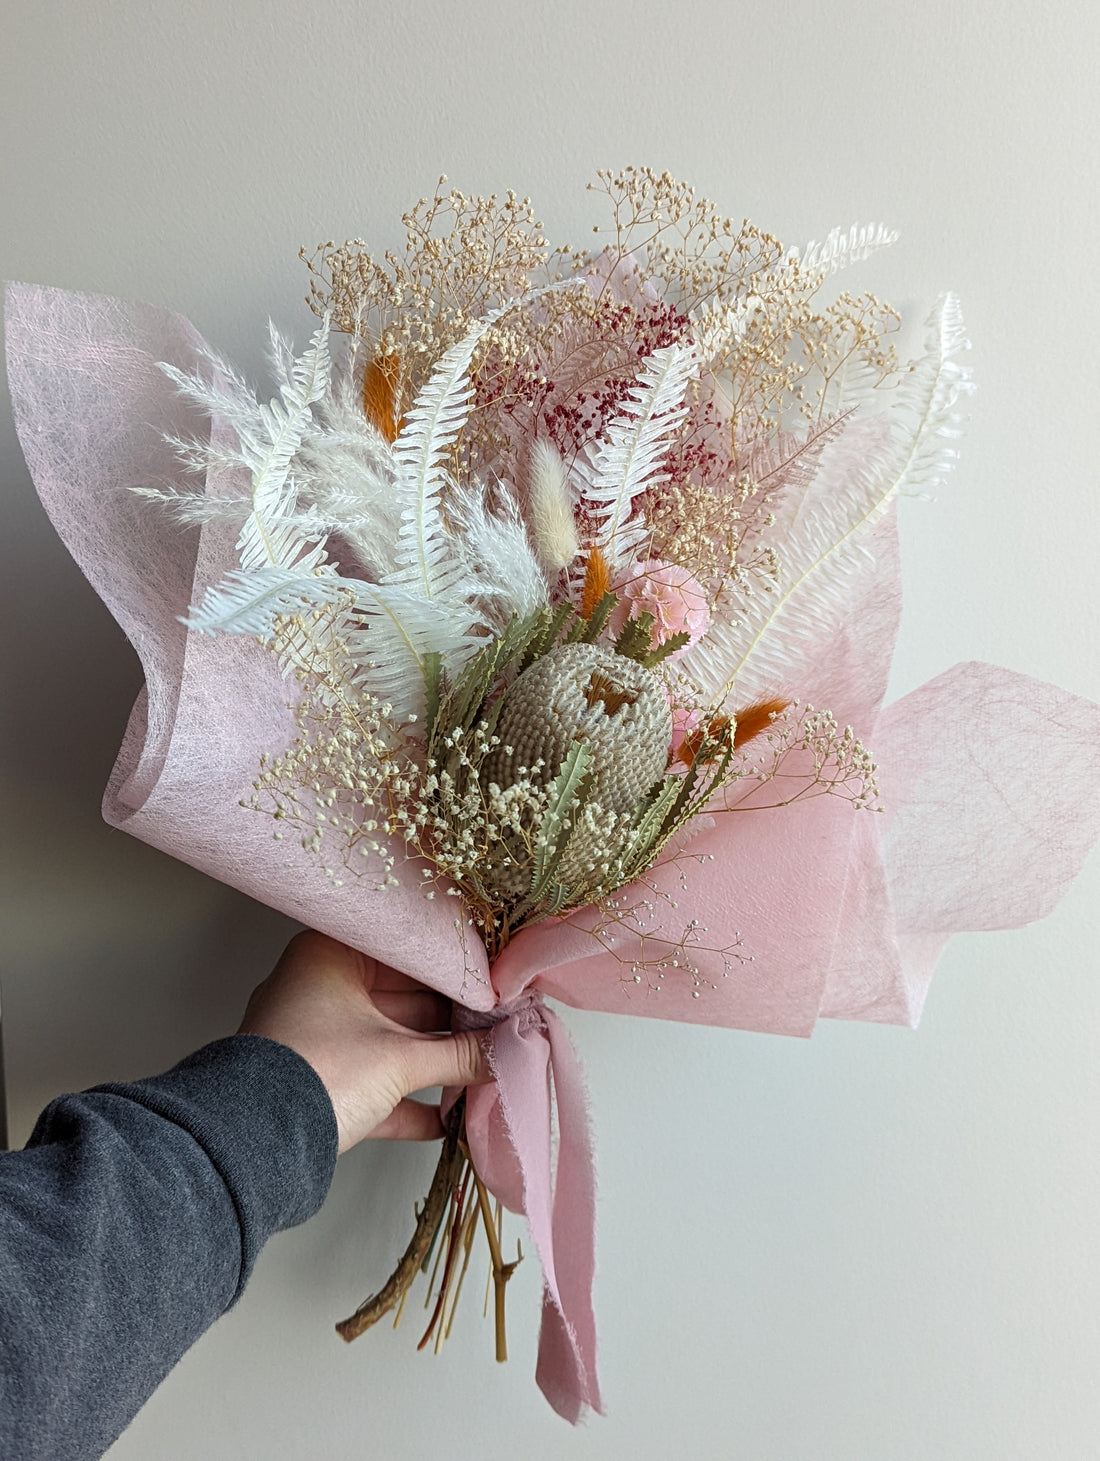 Caring for Your Dried Flowers